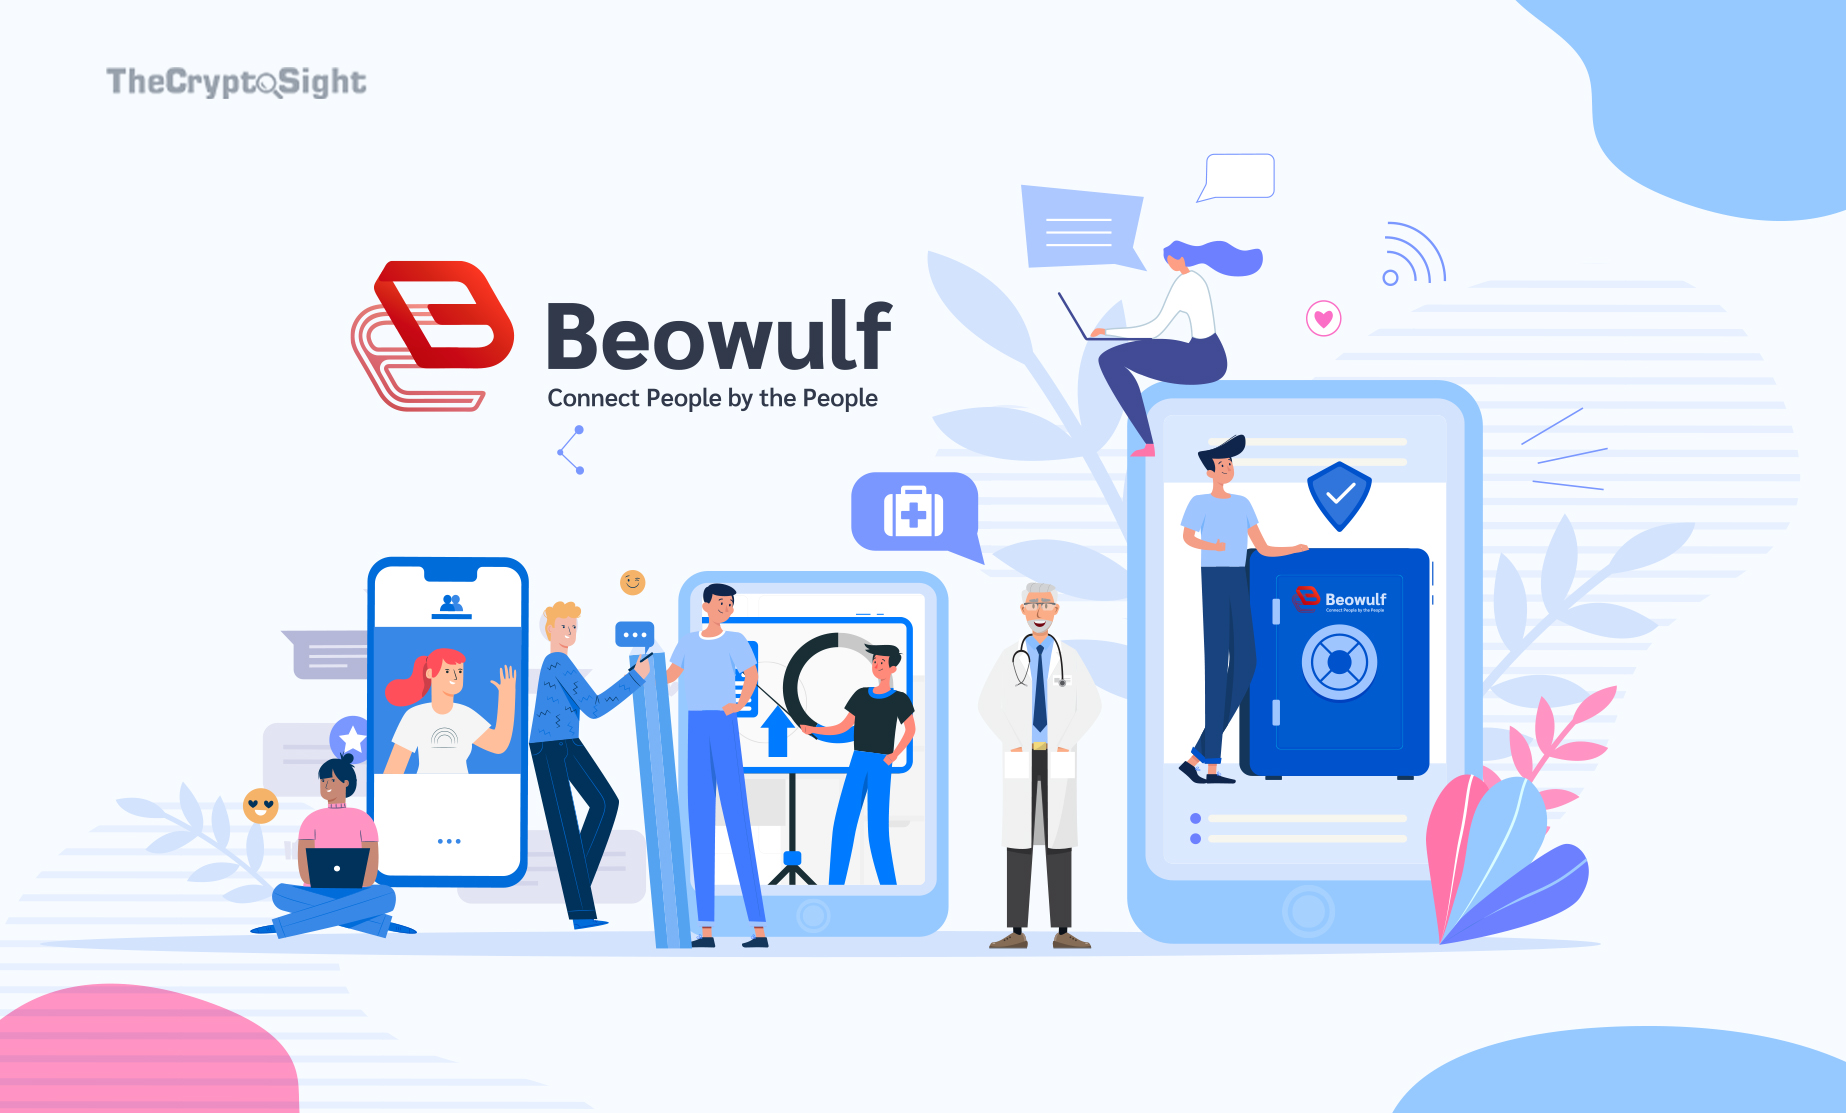 thecryptosight-disrupting-the-b2b-communications-market-with-beowulf